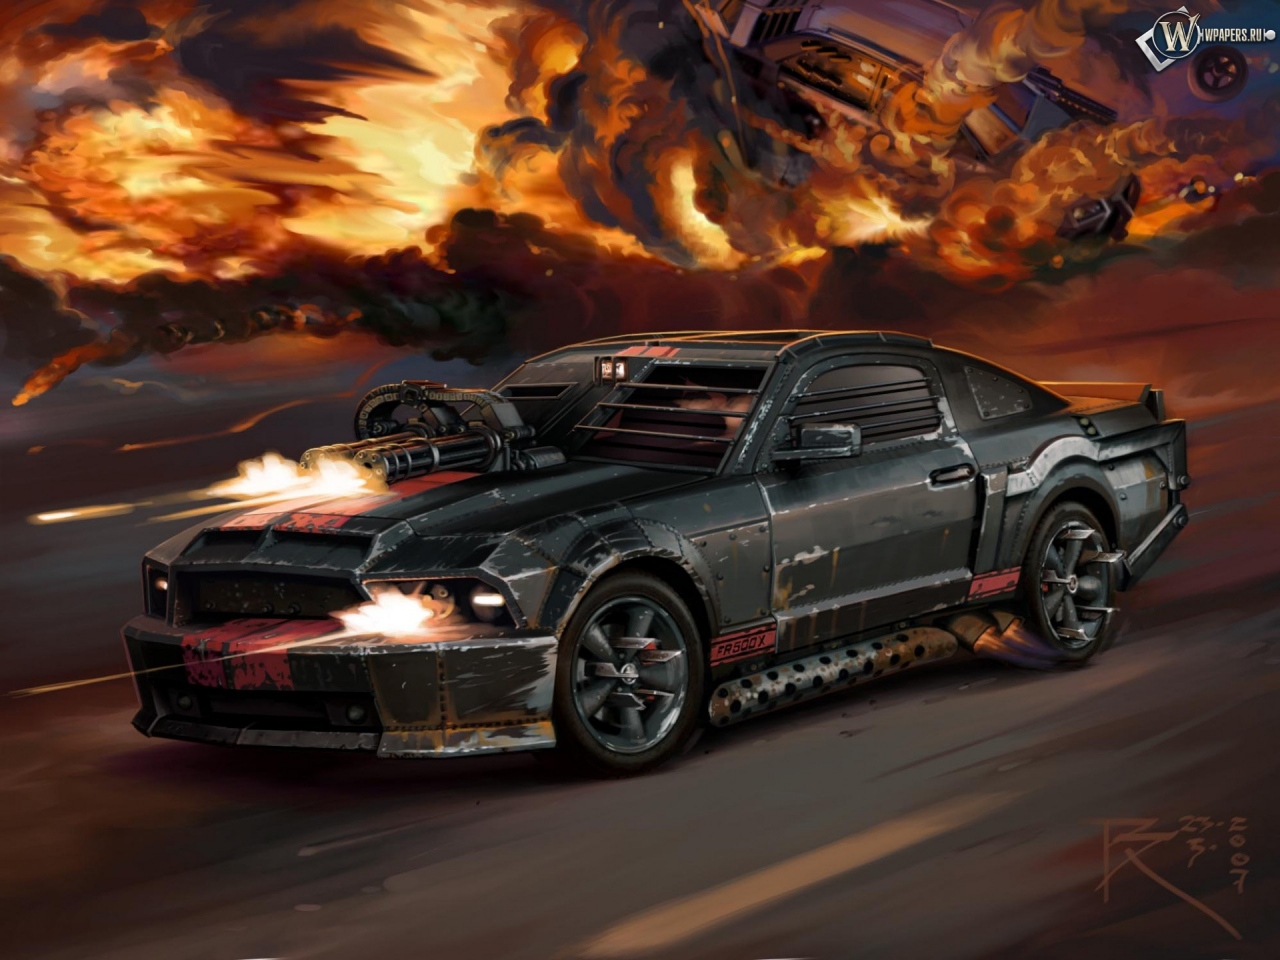 Car ford mustang death race 1280x960